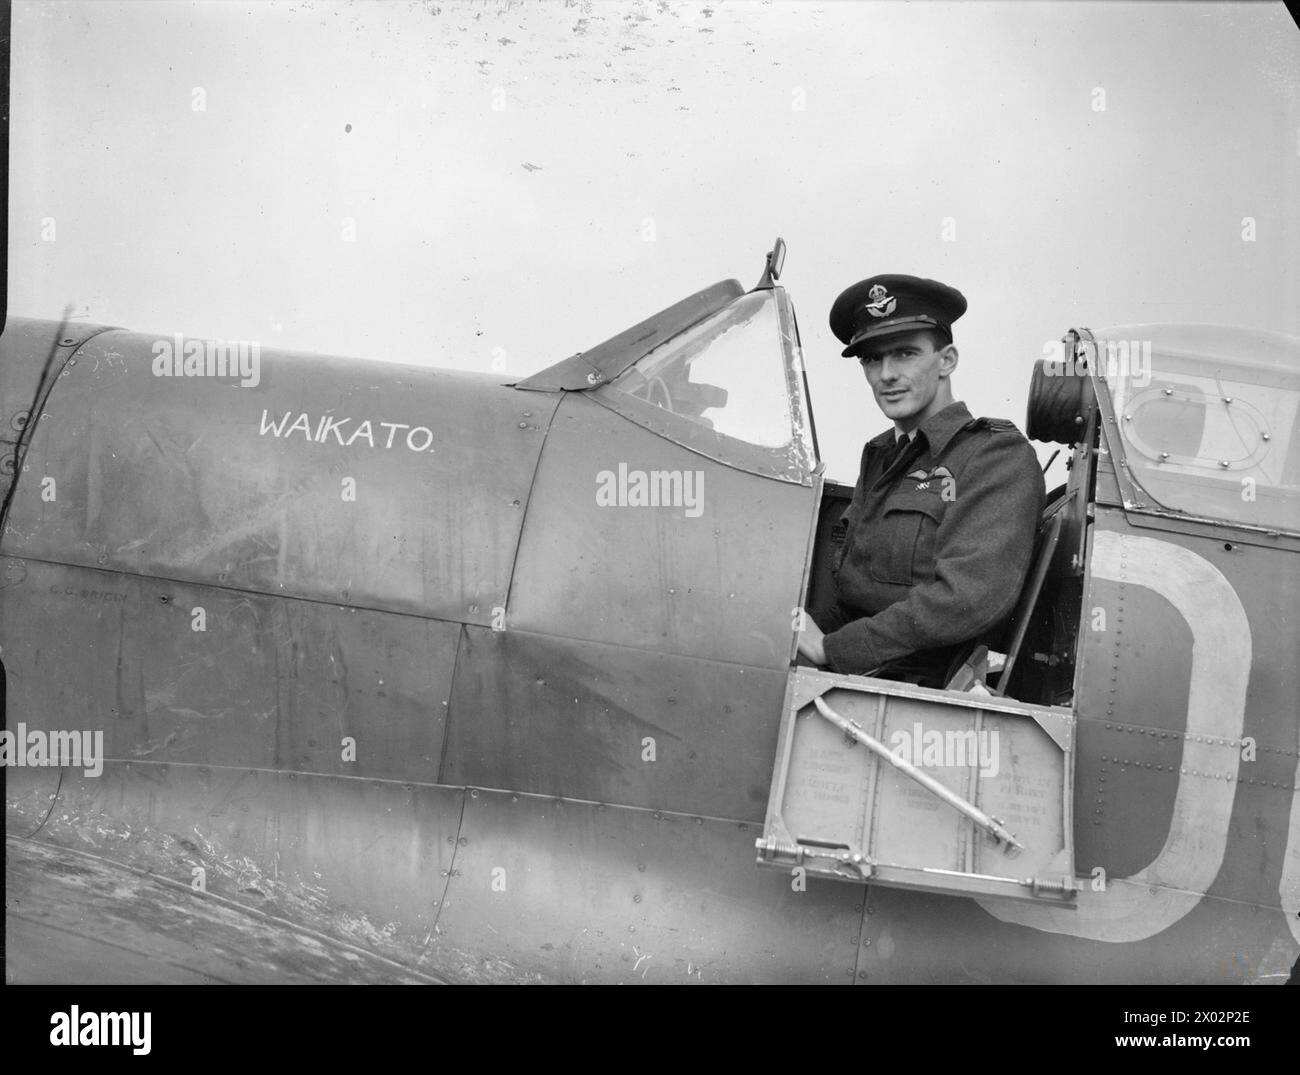 ROYAL AIR FORCE FIGHTER COMMAND, 1939-1945. - Flight-Lieutenant E P 'Hawkeye'Wells of No 485 (New Zealand) Squadron RAF, sitting in the cockpit of his Supermarine Spitfire Mark VB, 'Waikato', at Kenley, Surrey. He assumed command of the Squadron in February 1942, and later led the Kenley, Tangmere, Detling and West Malling Wings before being appointed the commanding officer of the Fighter Leaders School at the Central Flying Establishment in 1944. He finished the war having shot down 13 enemy aircraft  Royal Air Force, Maintenance Unit, 98, Royal Air Force, Central Flying Establishment Stock Photo